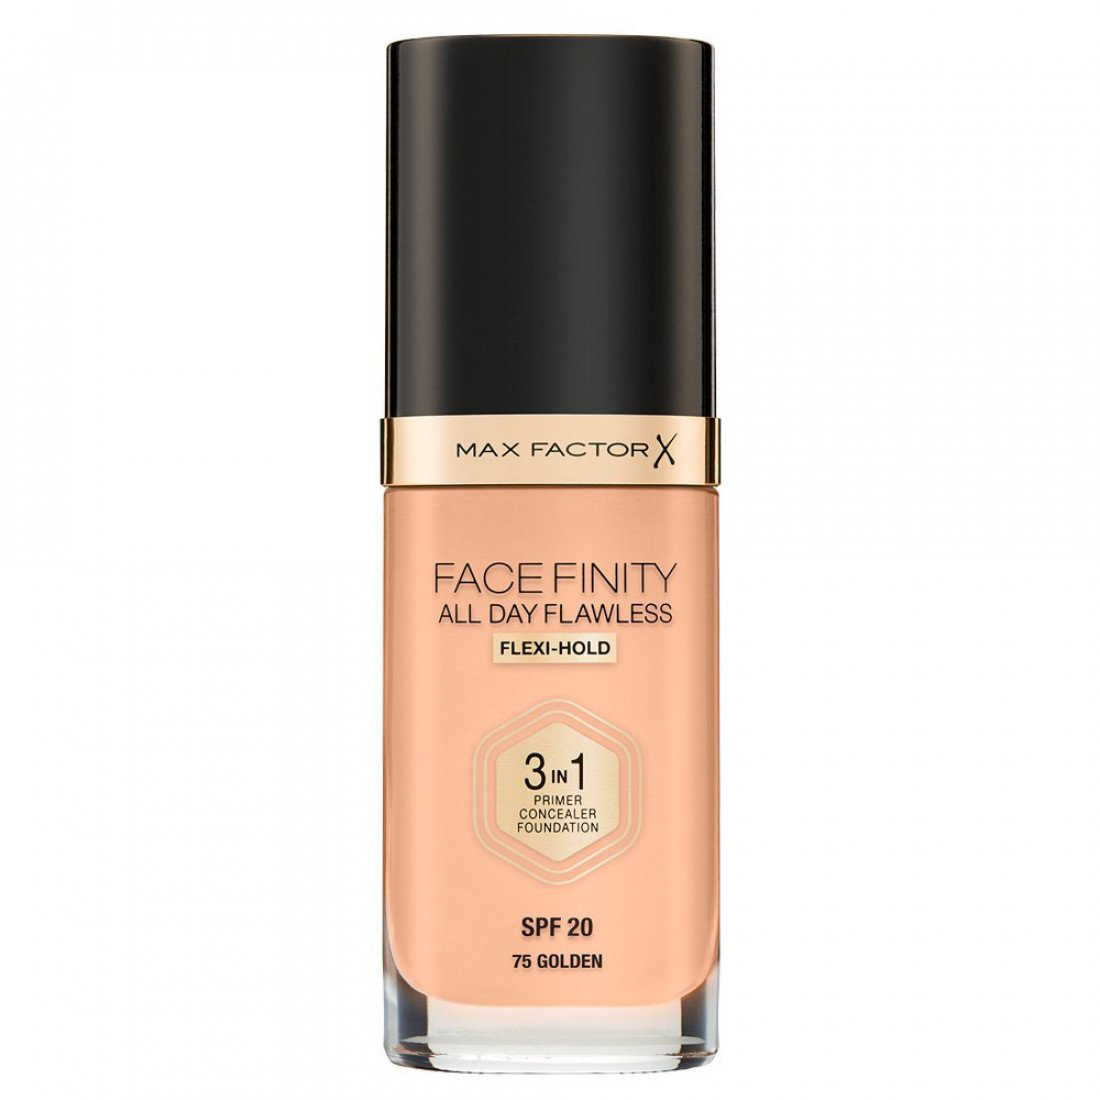 'Facefinity All Day Flawless 3 in 1' Foundation - 75 Golden 30 ml